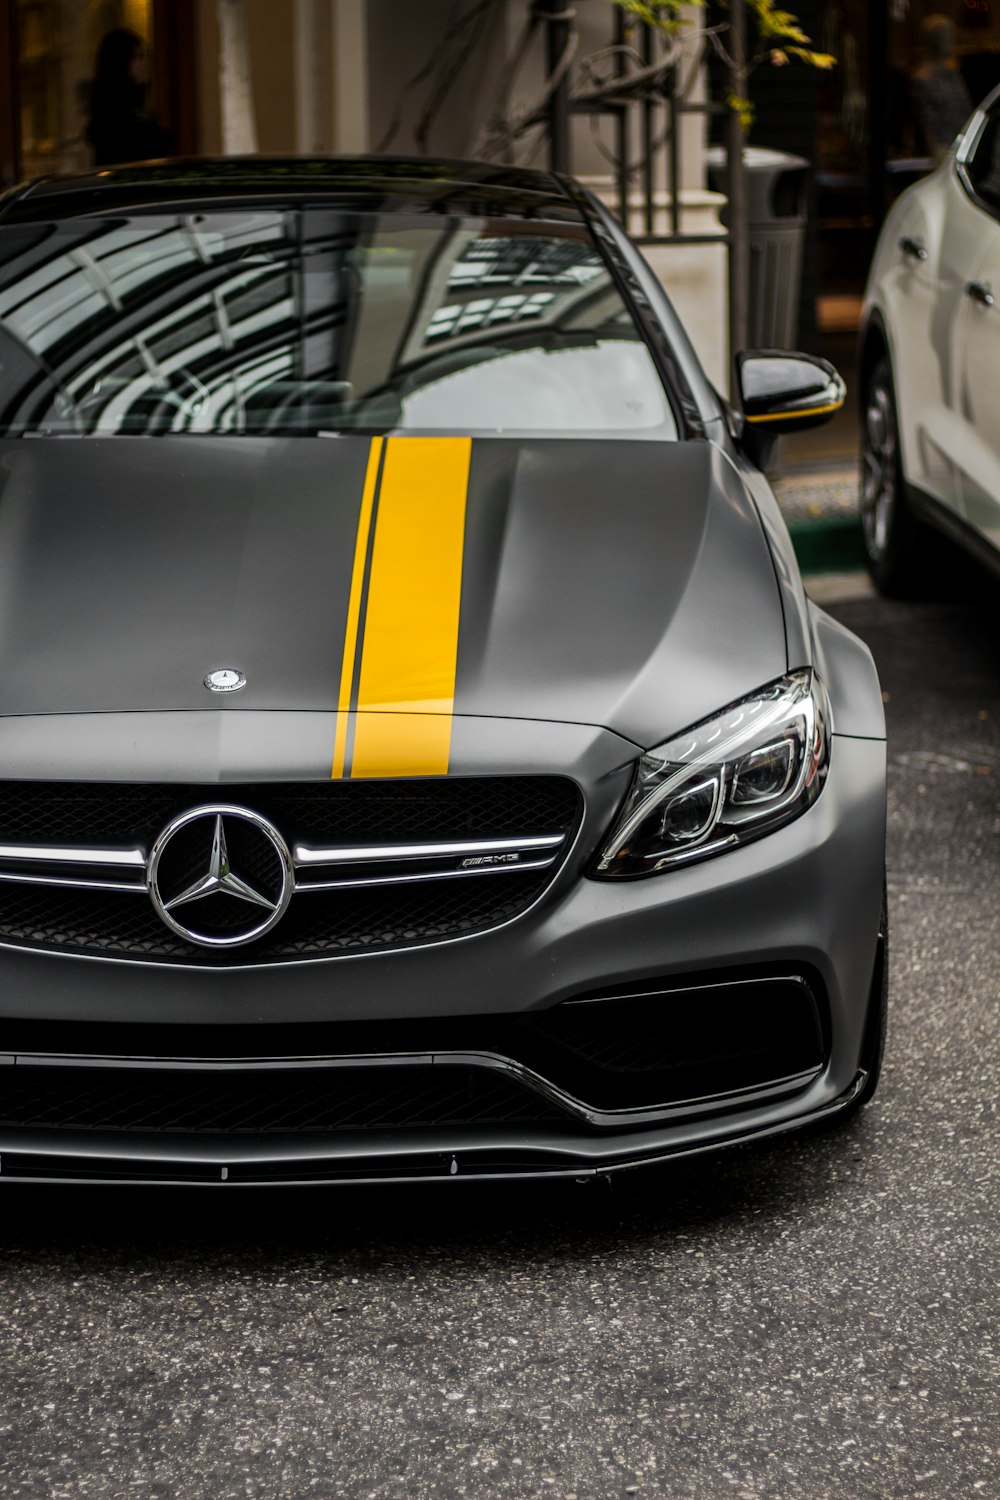 500 Mercedes Pictures Download Free Images On Unsplash Images, Photos, Reviews